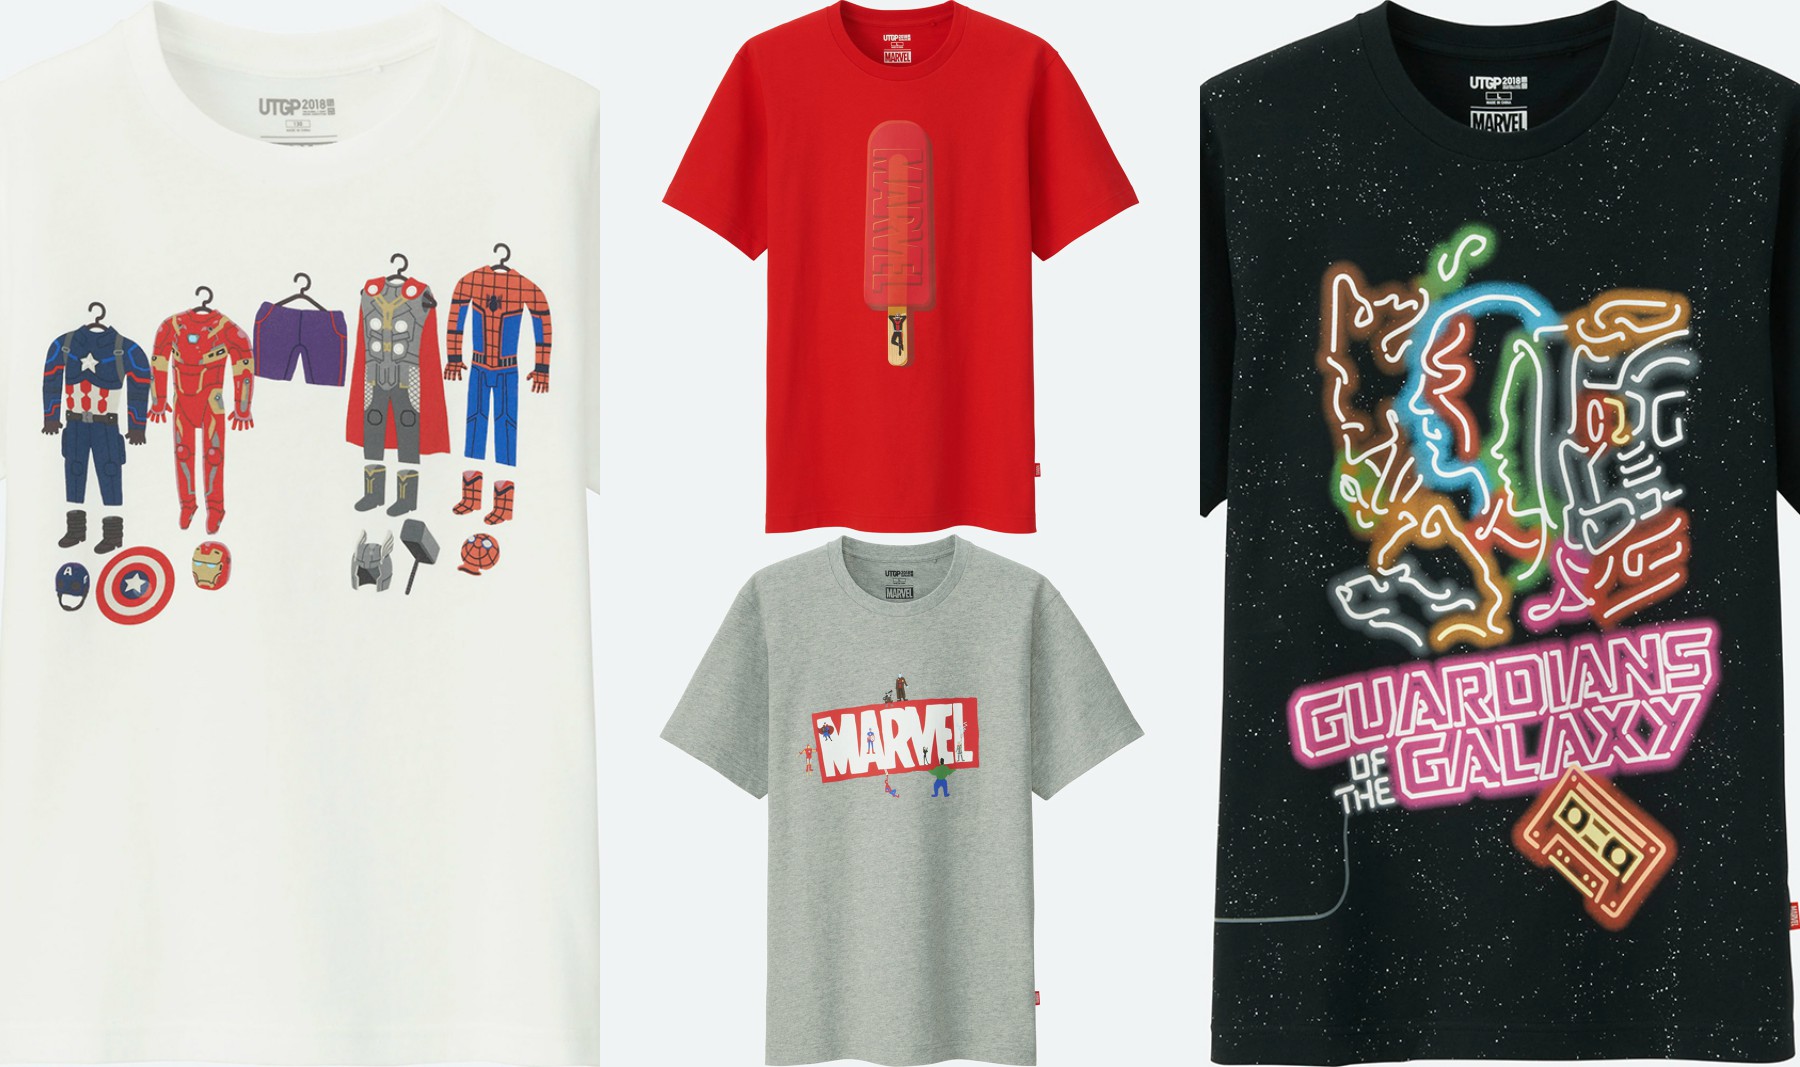 Uniqlo UT is getting ready to welcome the movie Avengers: Infinity War